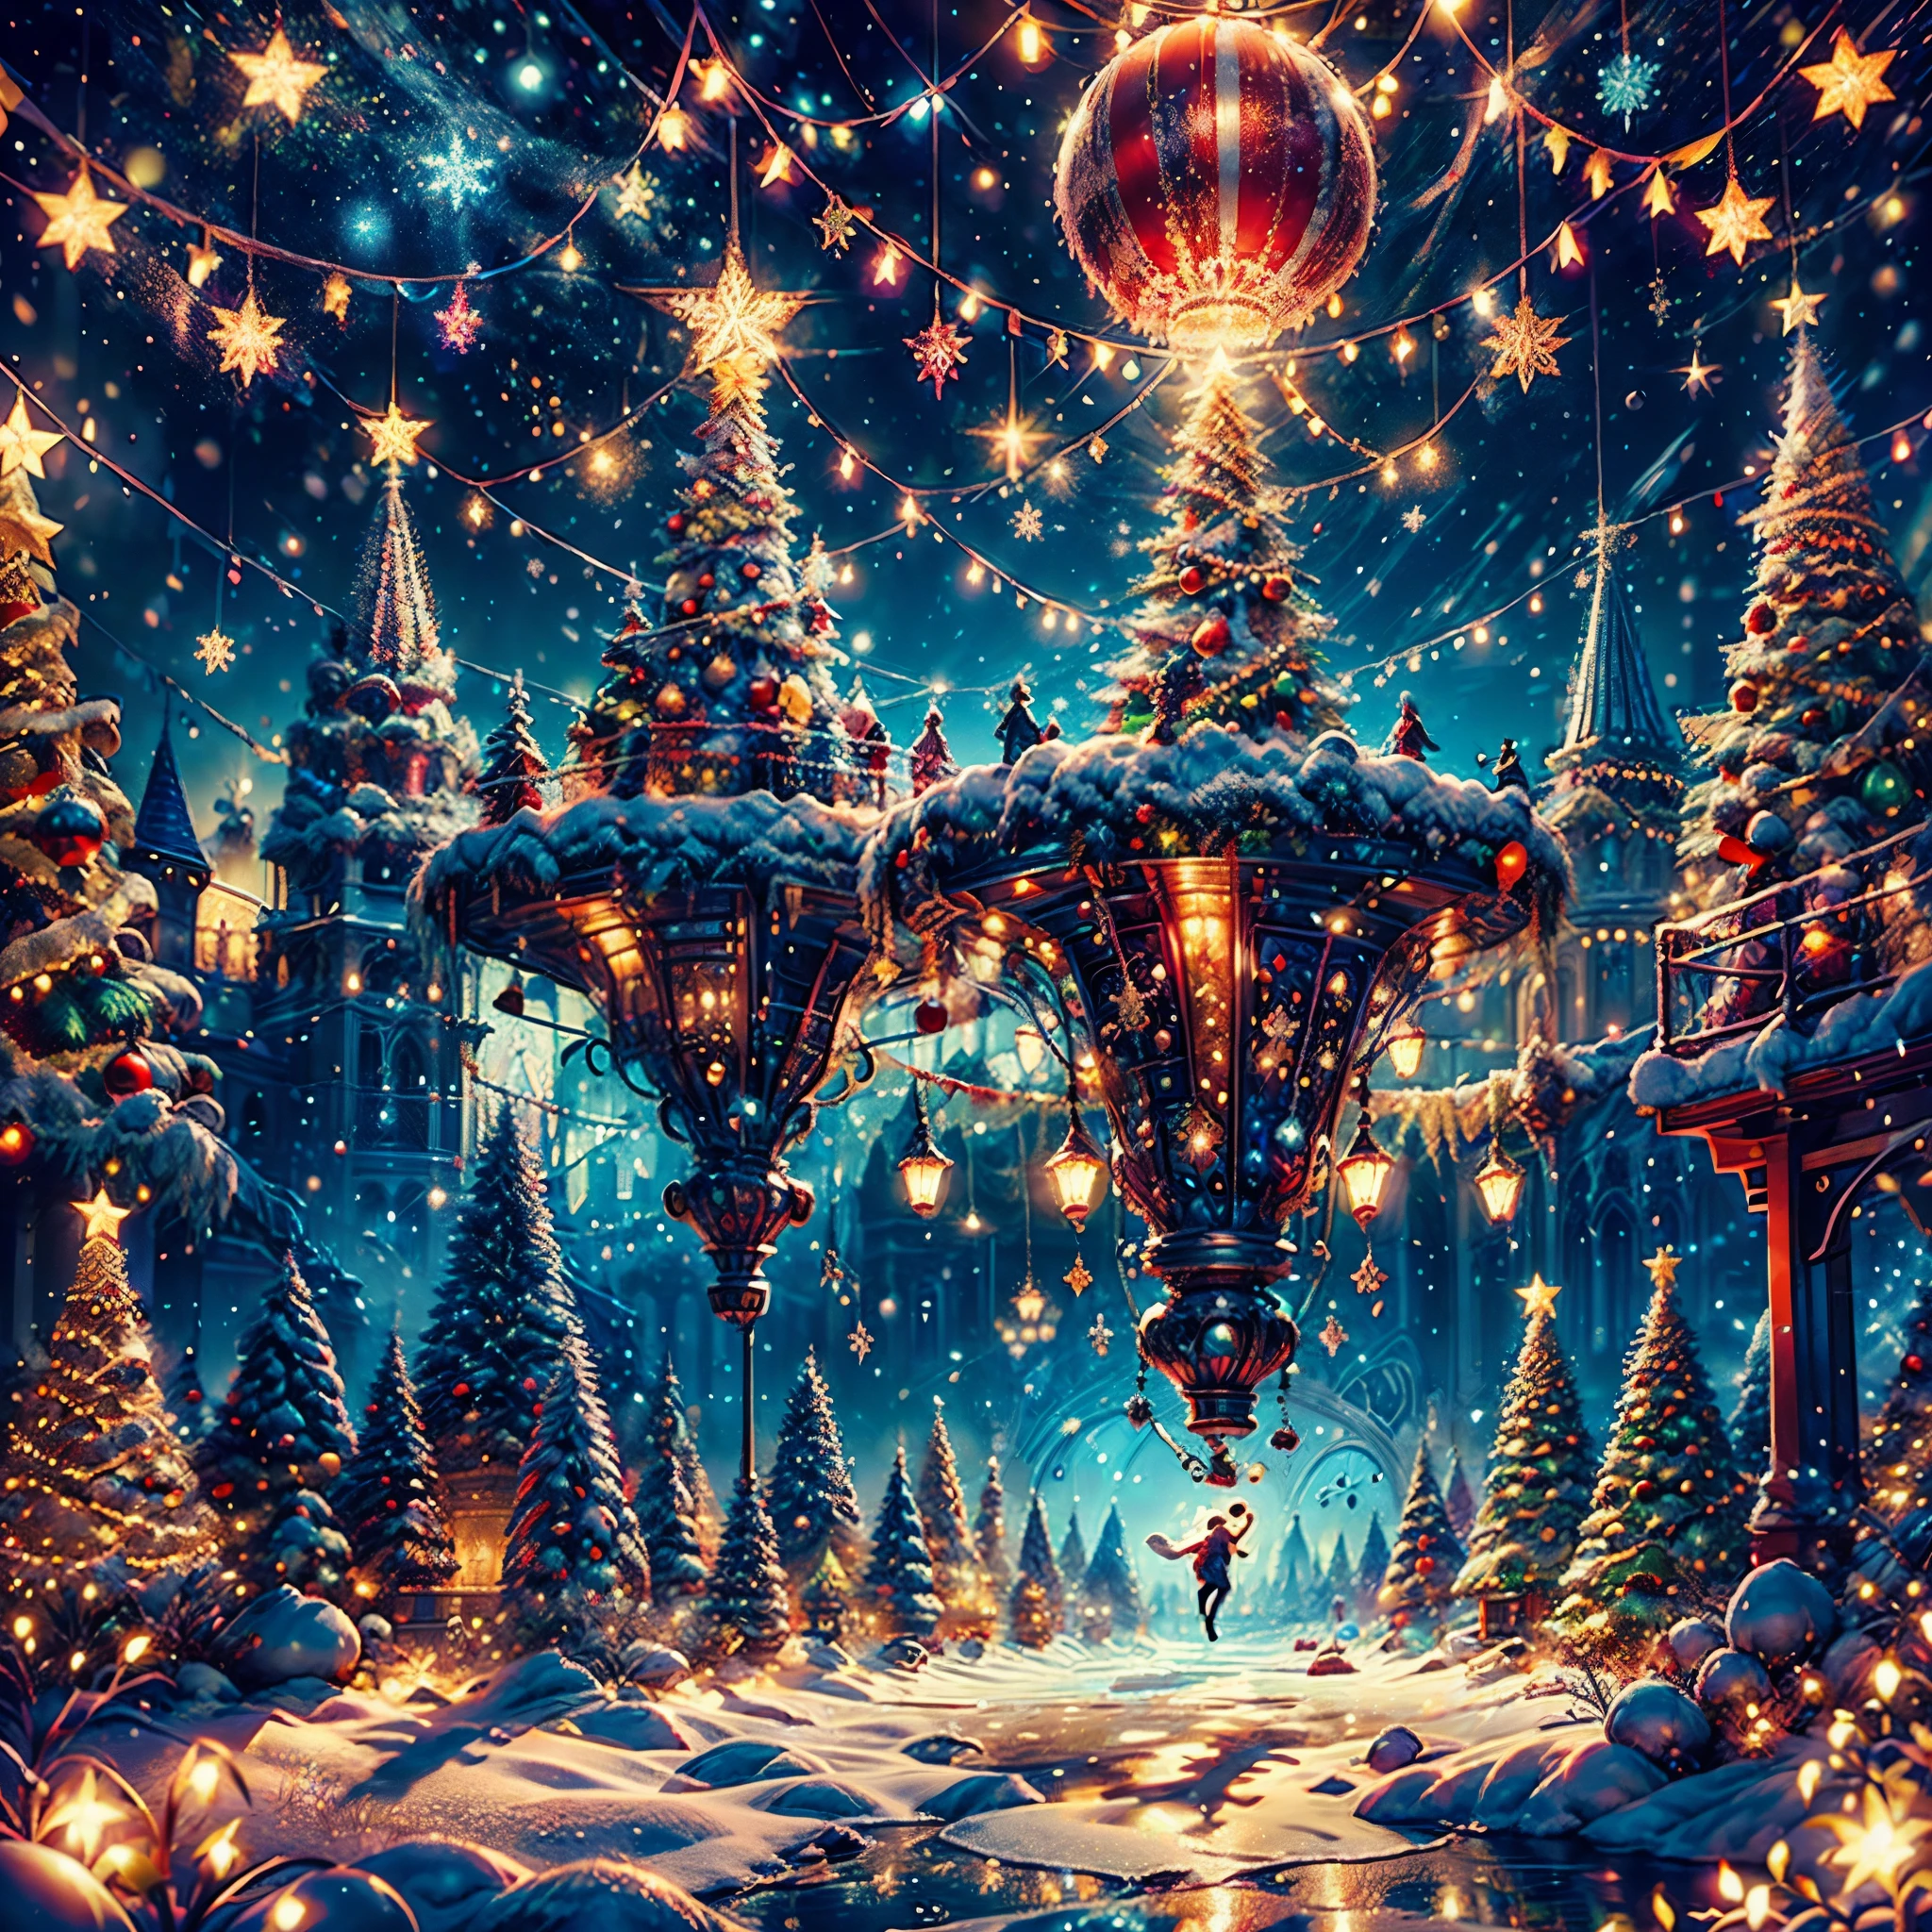 (((Vector illustration style)))，Vibrant colors, magical ambiance, Whimsical, Sparkling, Fantasy Christmas World,vibrant with colors, vivd colour, Magical atmosphere, Whimsical, Sparkling，Fantasy Christmas World，Inside the Christmas mall，The huge Christmas tree hung with lights、pompon、Christmas socks，Christmas pendants，Piles of gifts placed under the tree。A young couple and a  admire the Christmas decorations in the mall，Surrounded by performers in Santa Claus costumes and Santa Claus statues。The Christmas mall like a fairy tale world，full of magic， (Ghibli-like colours, pov, first-person view, accurate, anatomically correct, super detail, high details, high quality, award winning, best quality) 🎈🍦🍹❤🔆🕡(😘👩🎀👗⚜👒🥿👡🩲💅)🎪🎢🎡🎠 ultra_high-def ultra_Photo-realistic optimal ultra_high-quality opengl-shaders ultra_high-details accurate reflex ultra_high-res perfection volumetric lightning improved Octane_rendues UHD XT3 DSLR HDR 3dcg shadow analogiques extatiques symmetrical beholder sundrop Cinematic_sunlight UnrealEngine5 Ultra Masterpiece deep path Equirectangular_360 varied multi etc. --s 1000 --c 20 --q 20